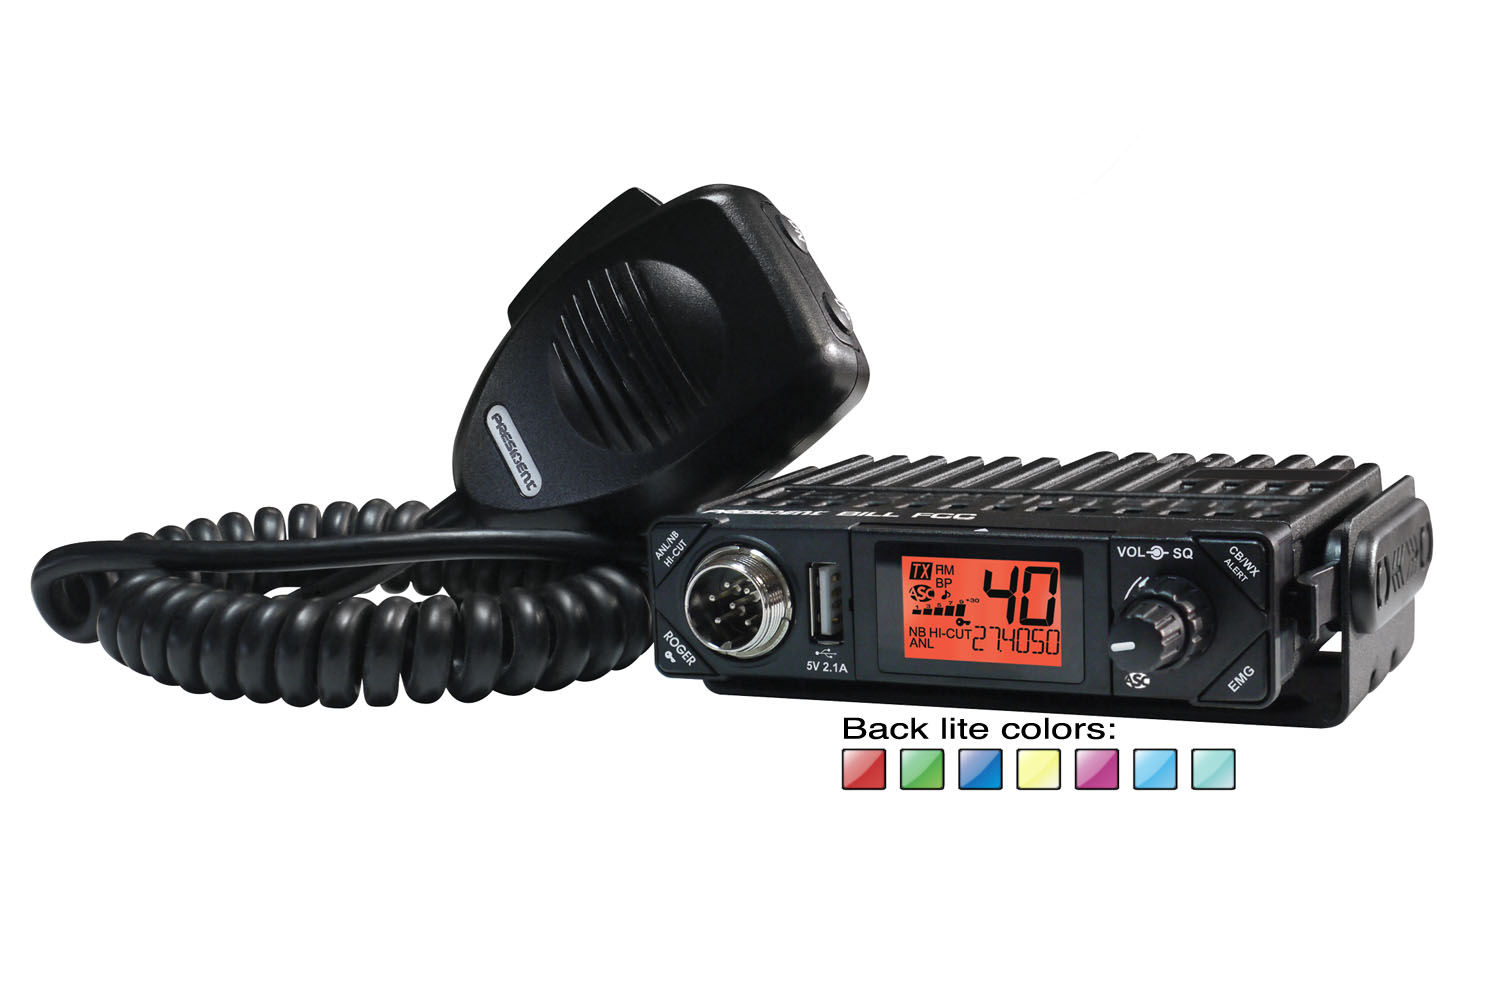 President - BILL Compact 40 Channel Am Mobile Cb Radio With USB Port & Selectable 7 Color Back-Lit Display